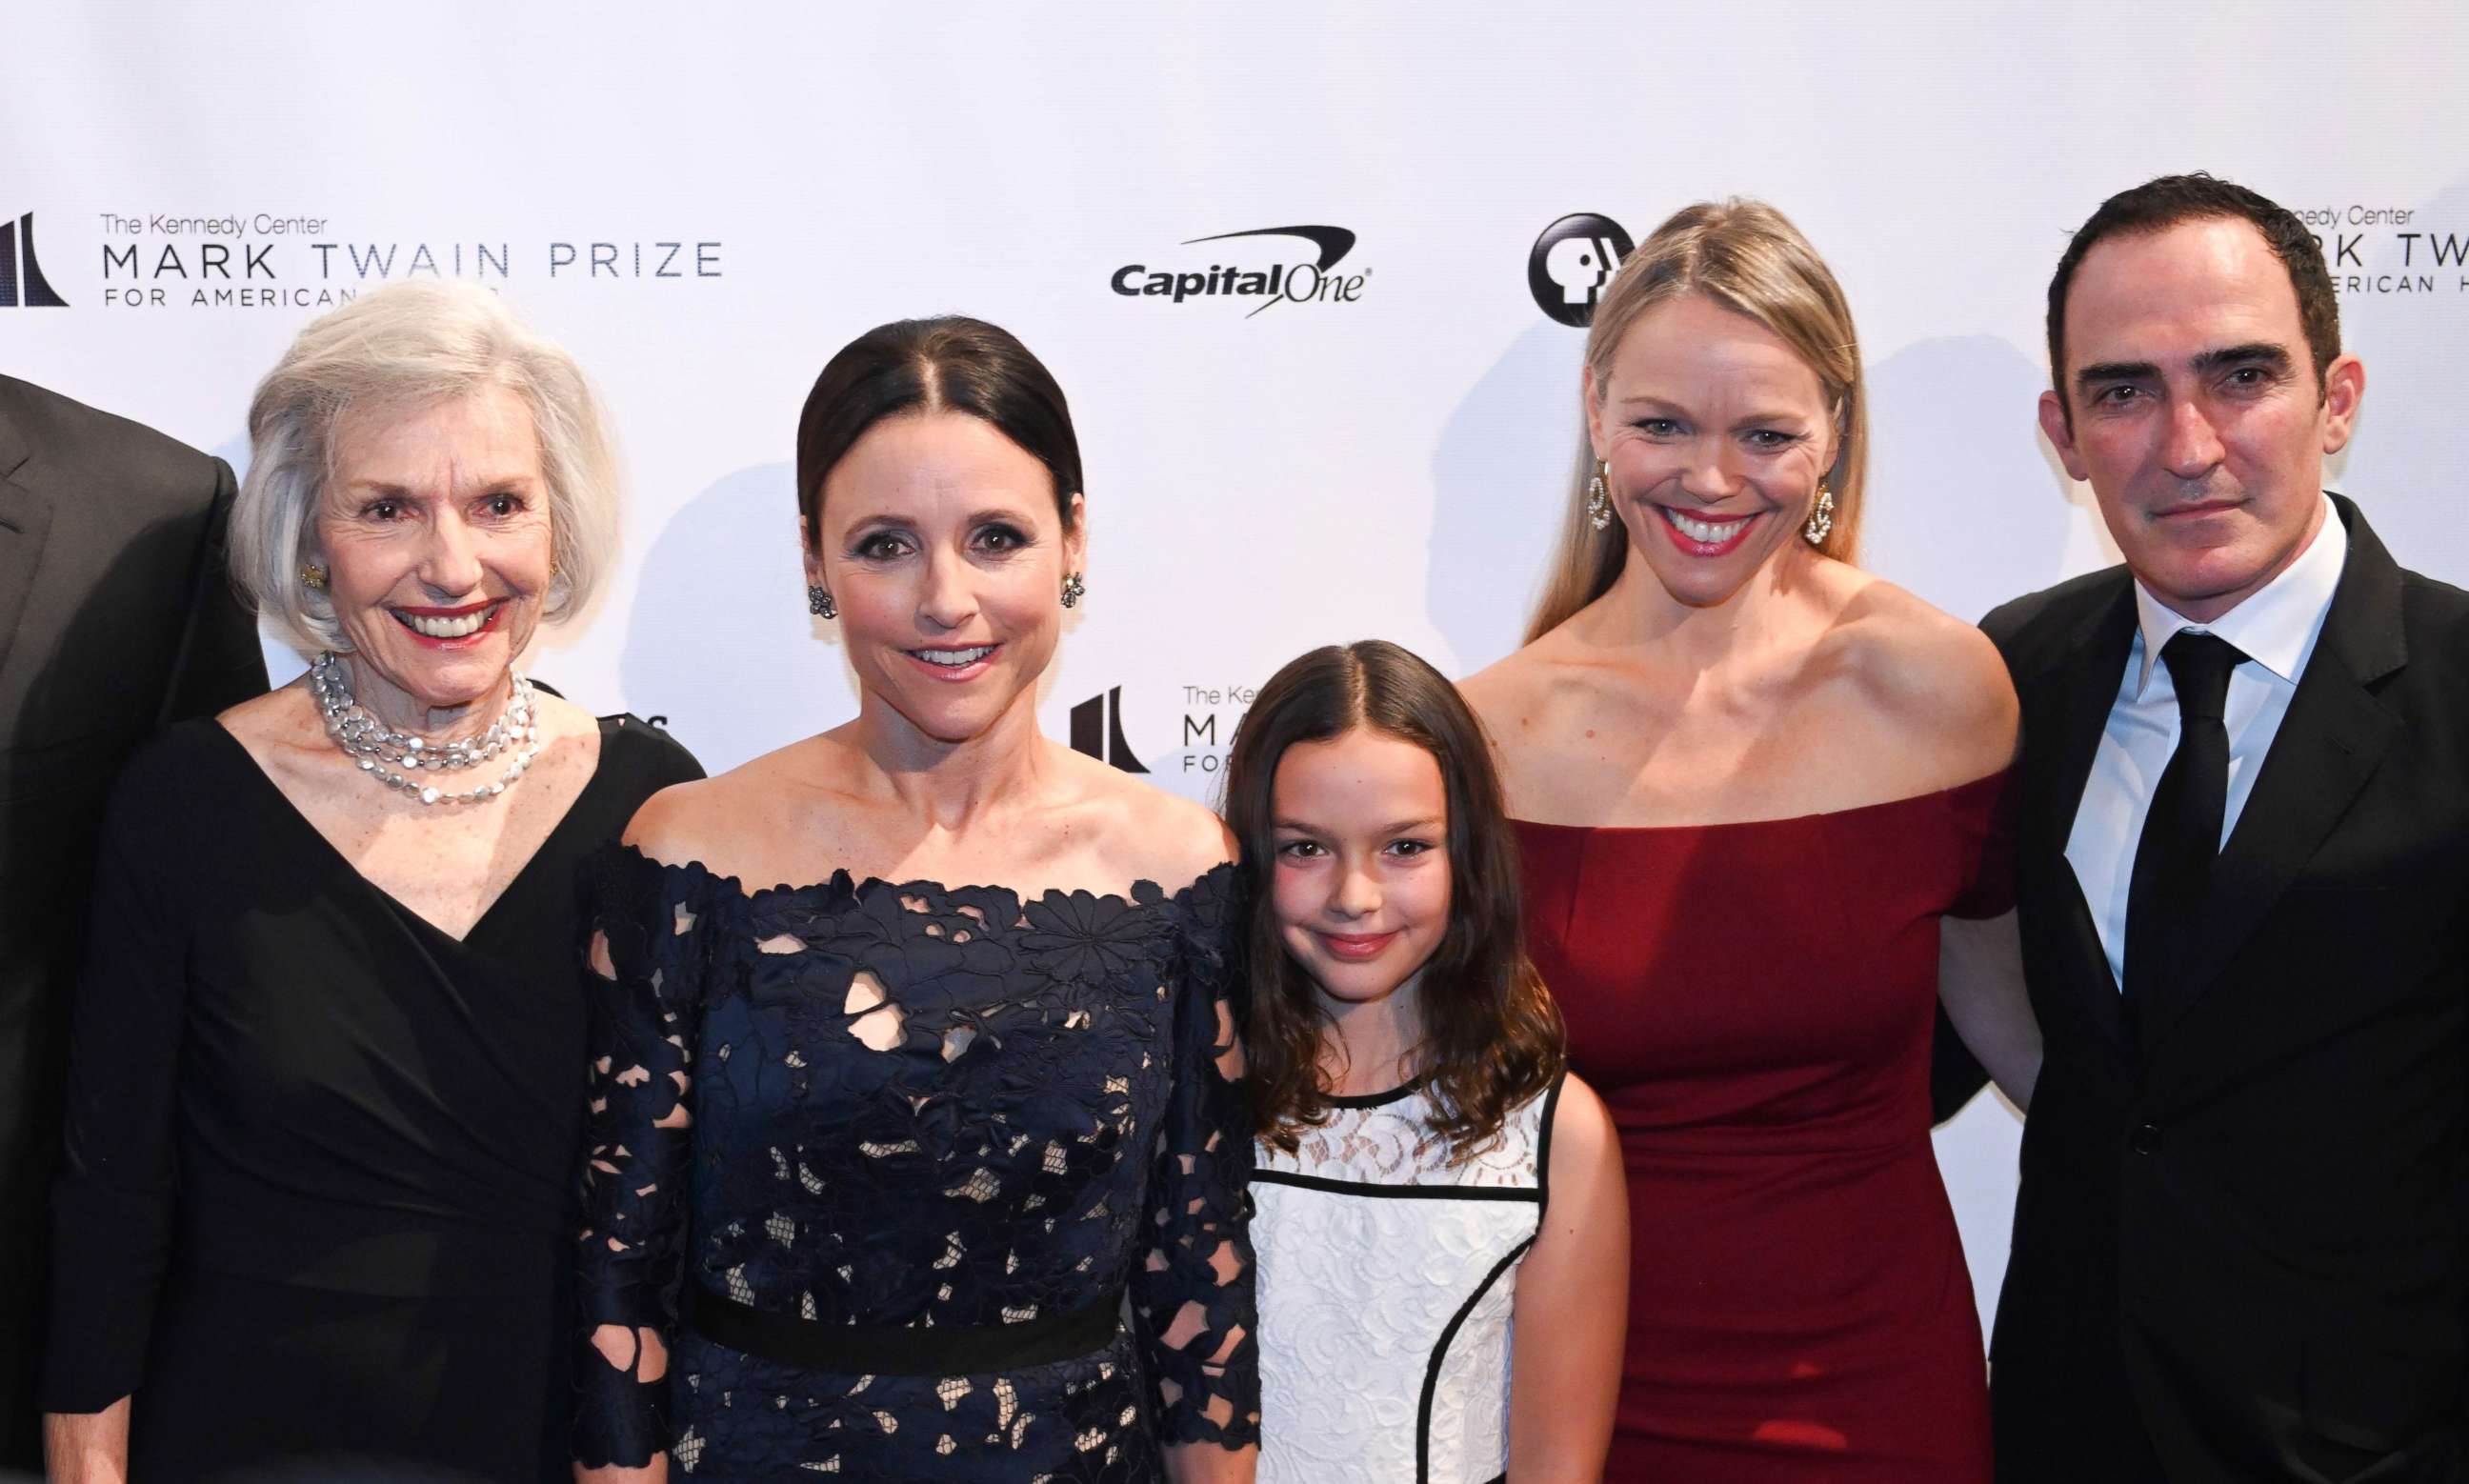 PHOTO: Julia Louis-Dreyfus poses with her family on the red carpet for the 21st Annual Mark Twain Prize for American Humor at the Kennedy Center in Washington, D.C., Oct. 21, 2018.